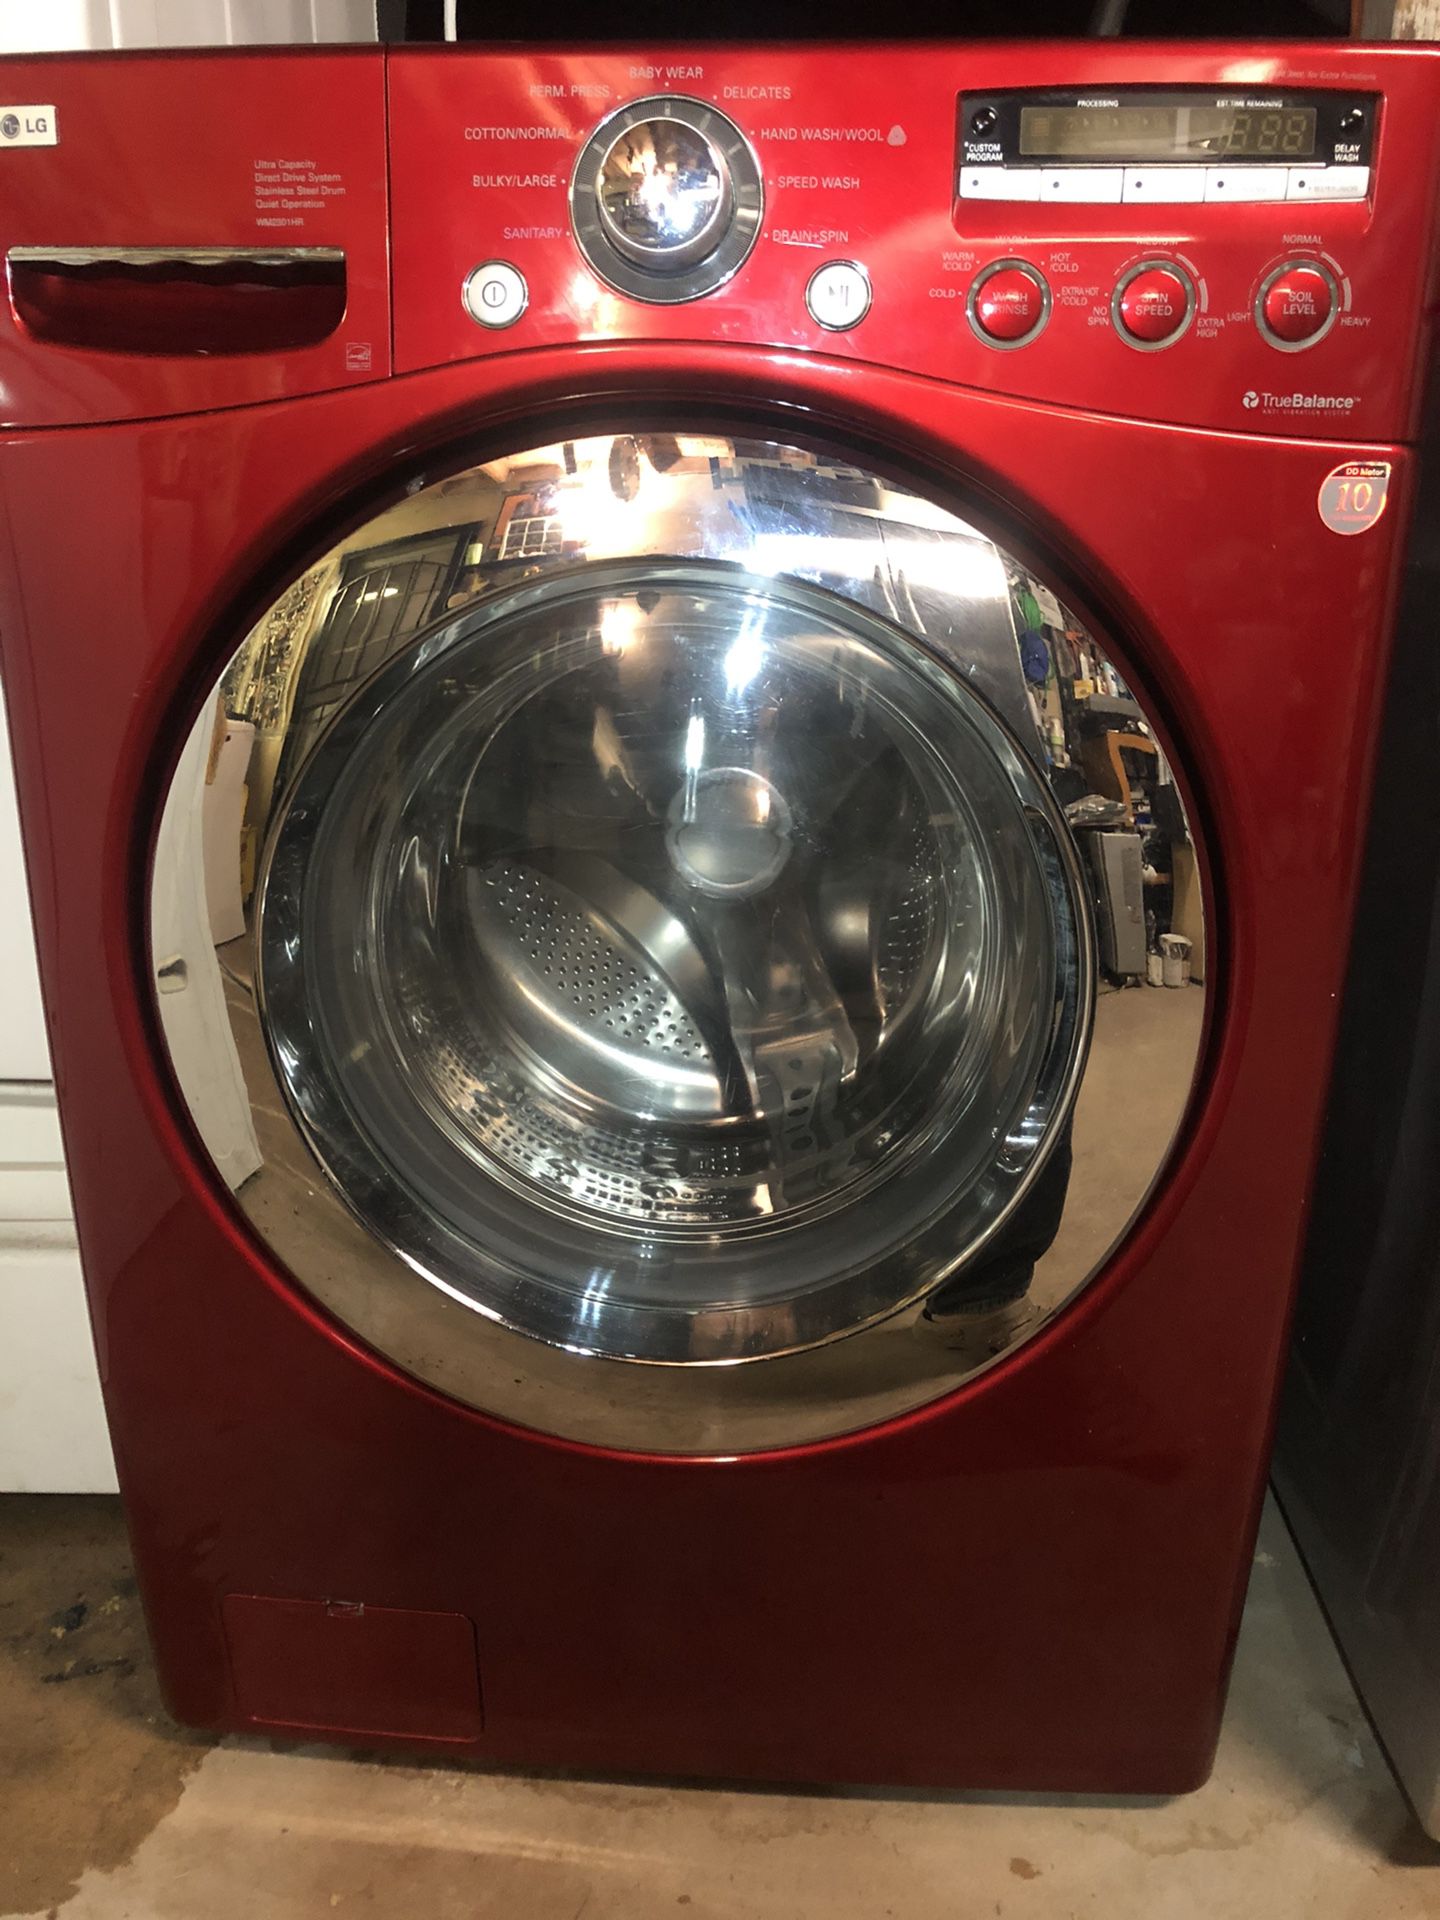 LG washing machine for sale works very well